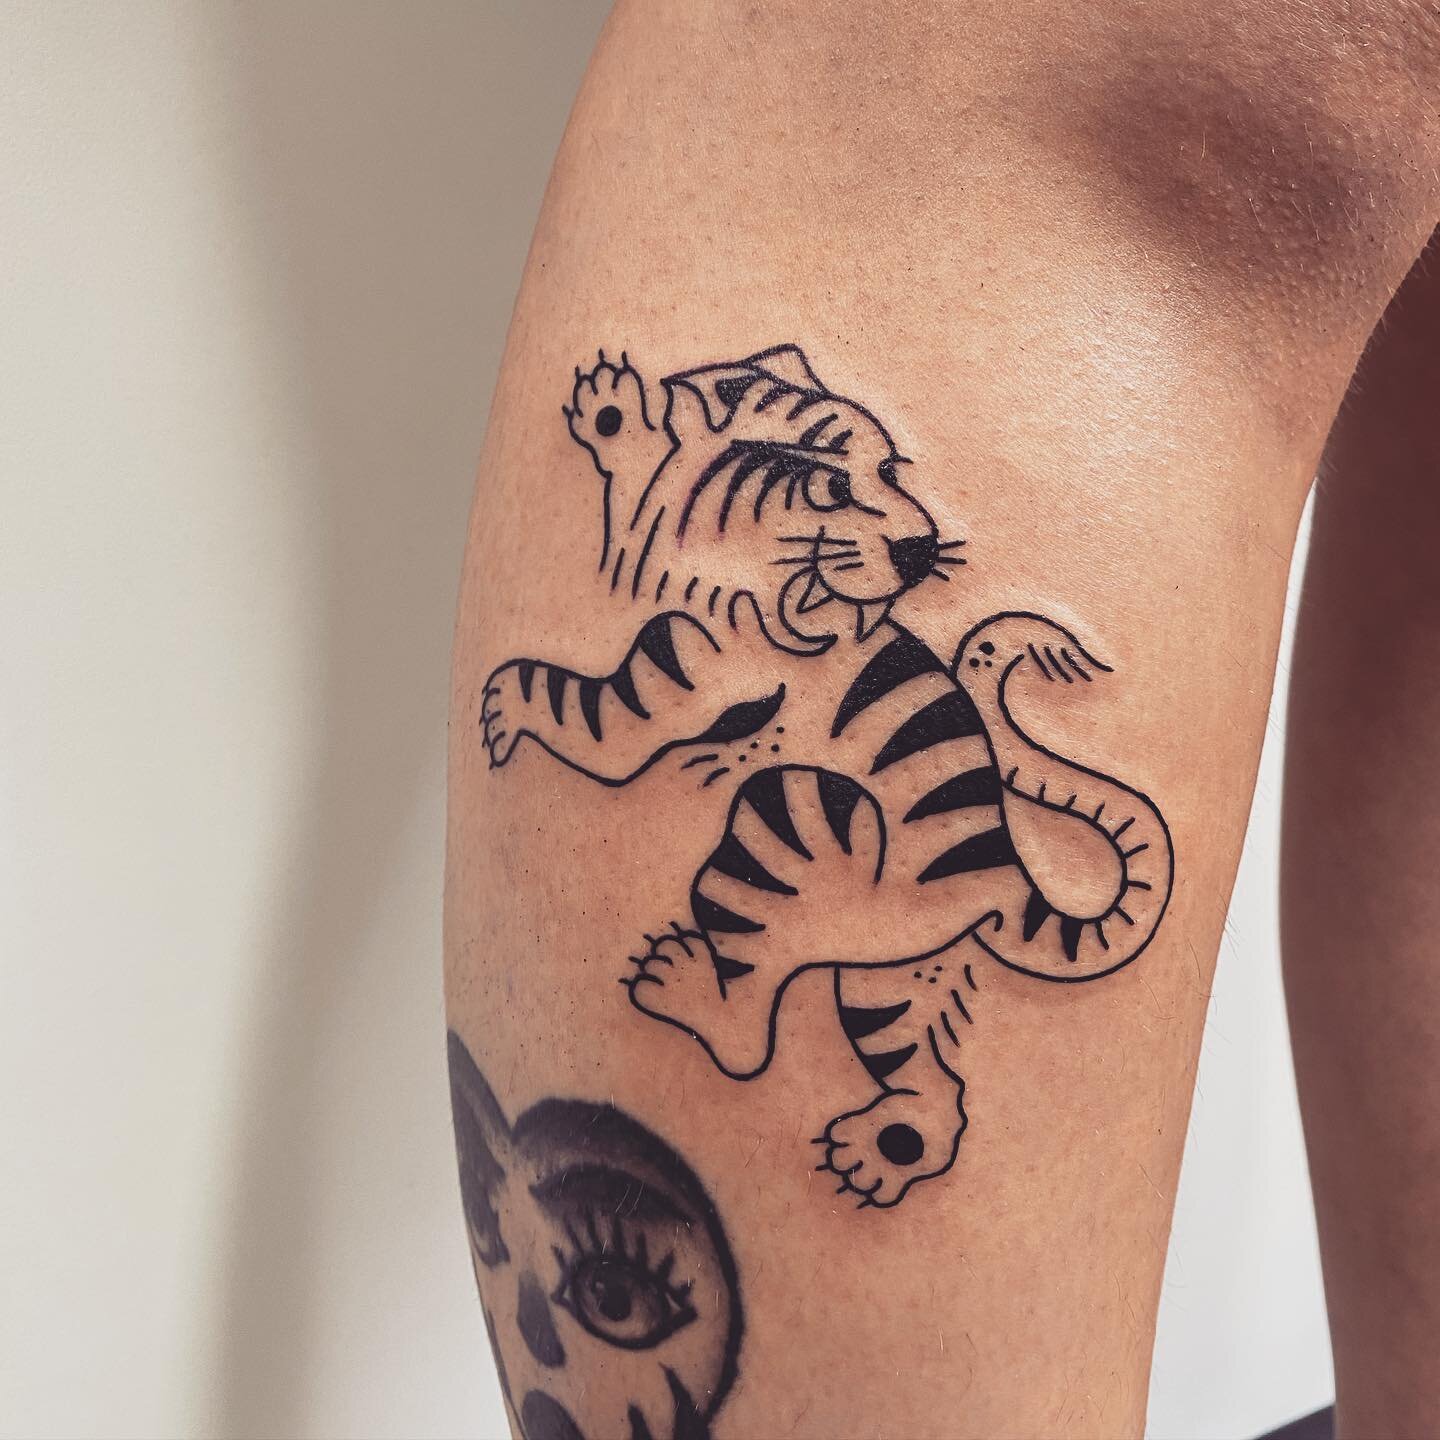 Little tiger

One from my flash thanks @ninahenches for picking it 
@_crownofthorns 
#tiger #tigers #tigertattoo #tigertattoos #tattoos #tattoo #blackworktattoo #traditionaltattoo #inked #inkedgirl #illustration #art #chester #chestercity #chestertat